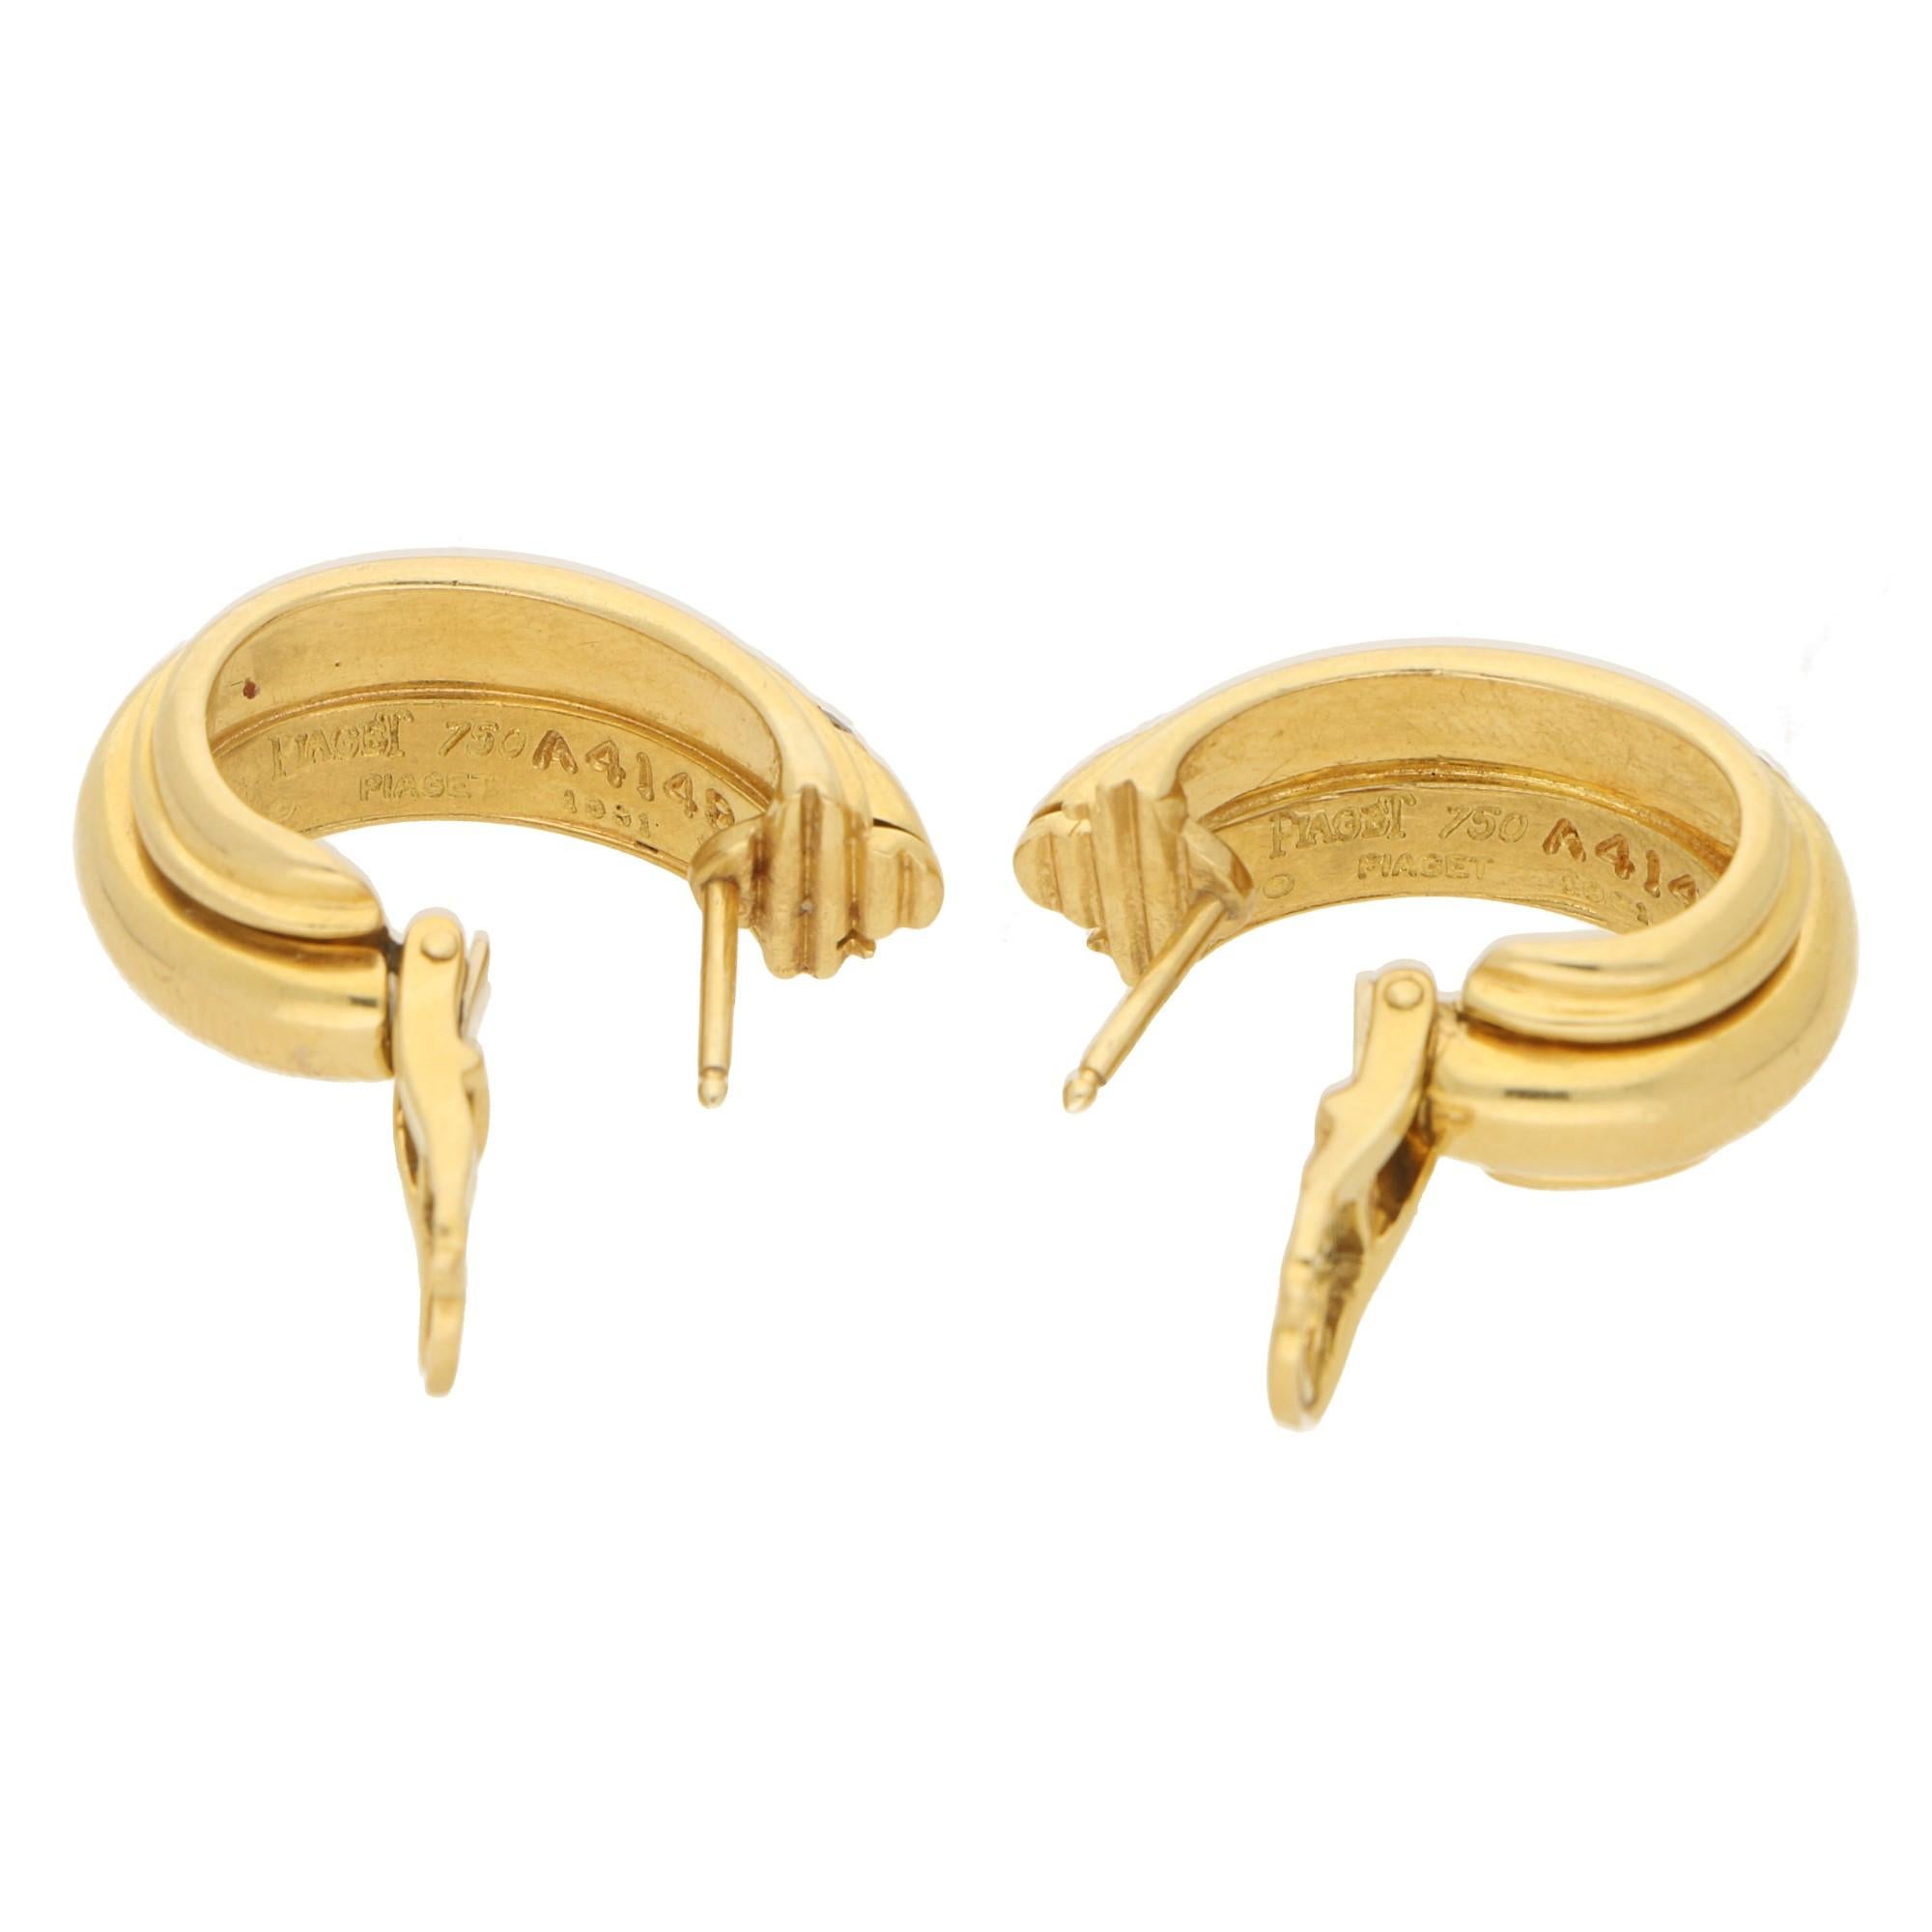 A beautiful pair of Piaget Possession diamond hoop earrings set in 18k yellow gold. Each earring is set with 3 round brilliant cut diamonds in rubover settings, featuring the signature floating hoop to the centre. The pair give off an etruscan style